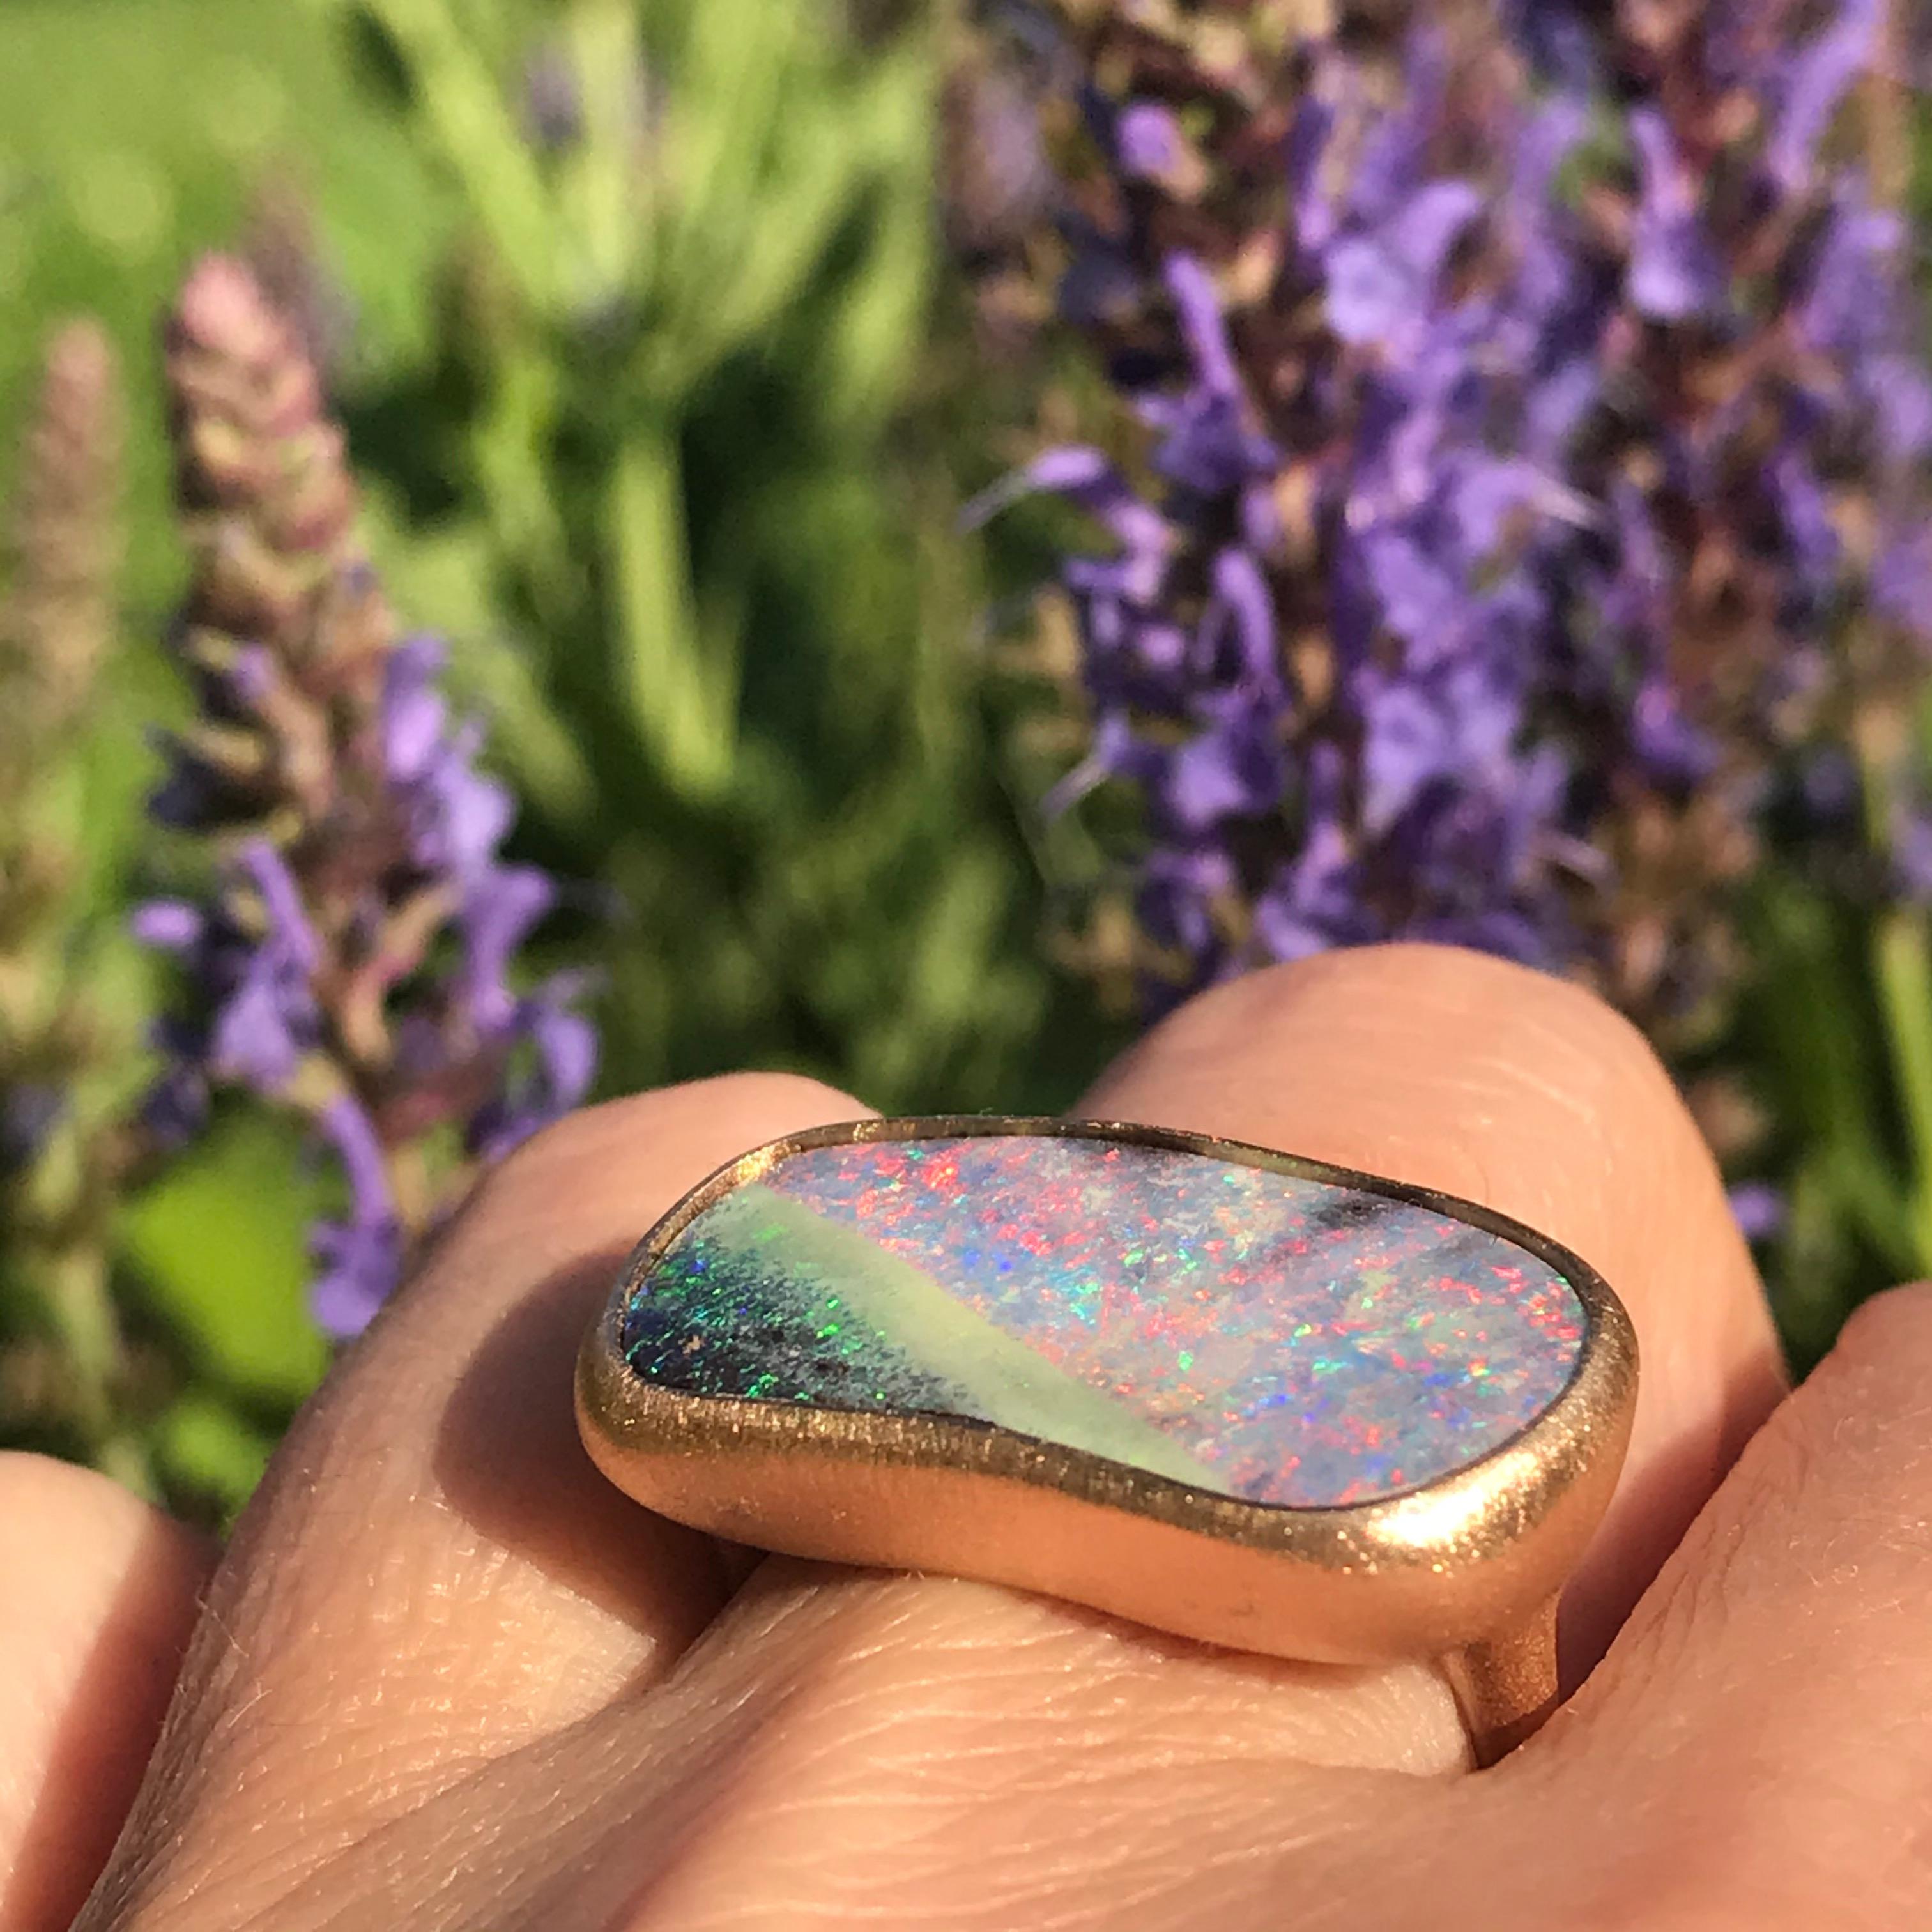 Dalben design 18k rose gold satin finishing ring with a  13,7 carat bezel-set pink green Australian Boulder Opal .
The stone has pink spots on pastel colors with a deep green spots corner and reminds a magical abstract landscape.
Ring size 7 1/4 -